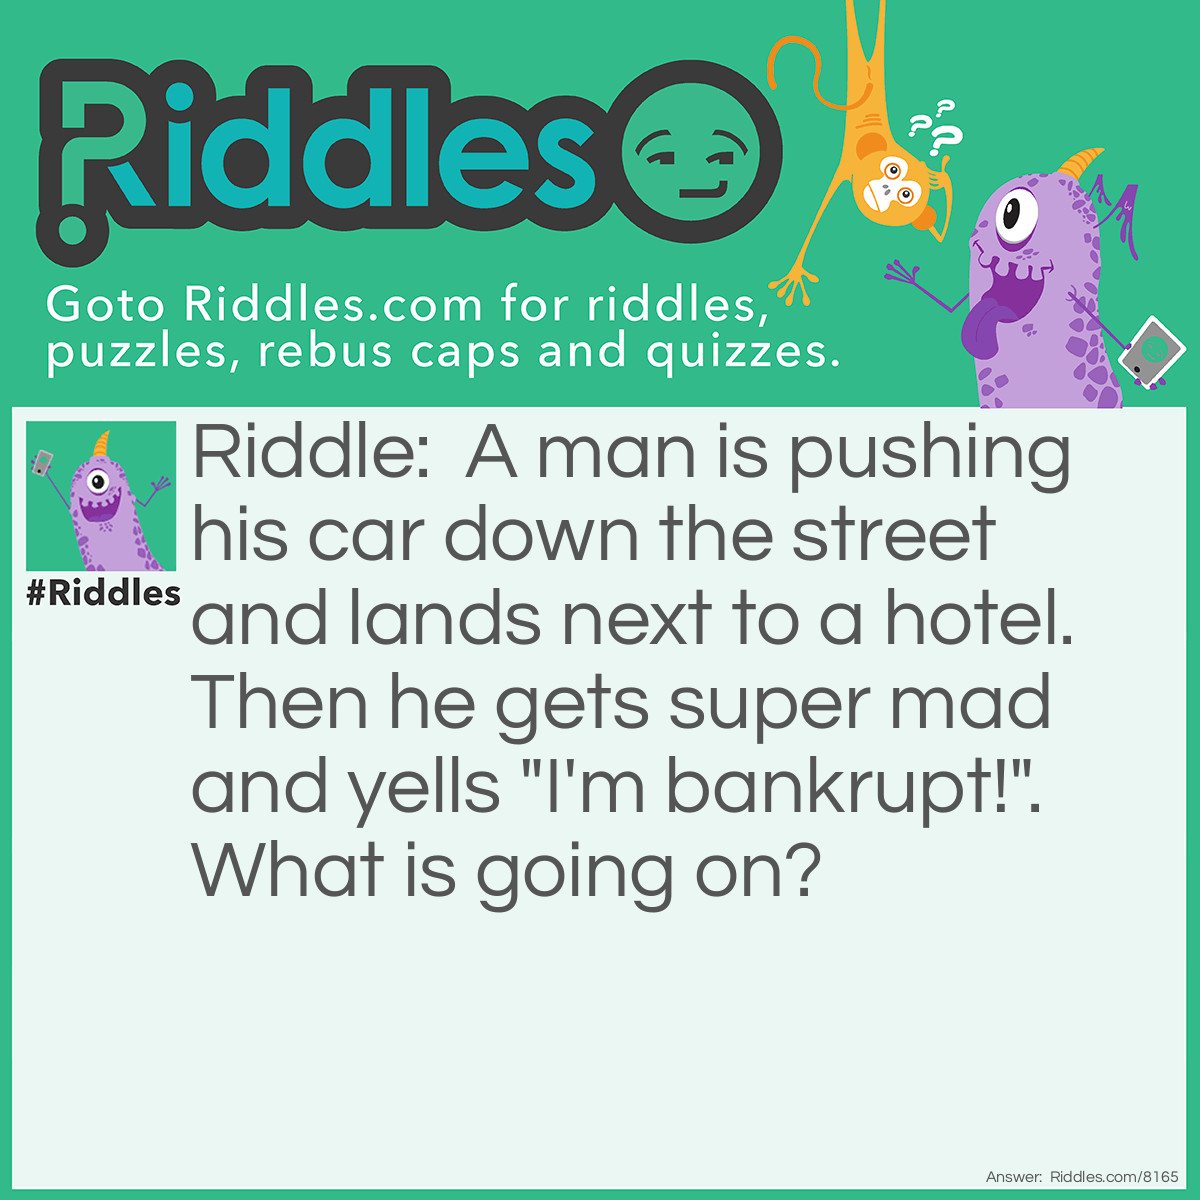 Riddle: A man is pushing his car down the street and lands next to a hotel. Then he gets super mad and yells "I'm bankrupt!". What is going on? Answer: A friendly game of monopoly.